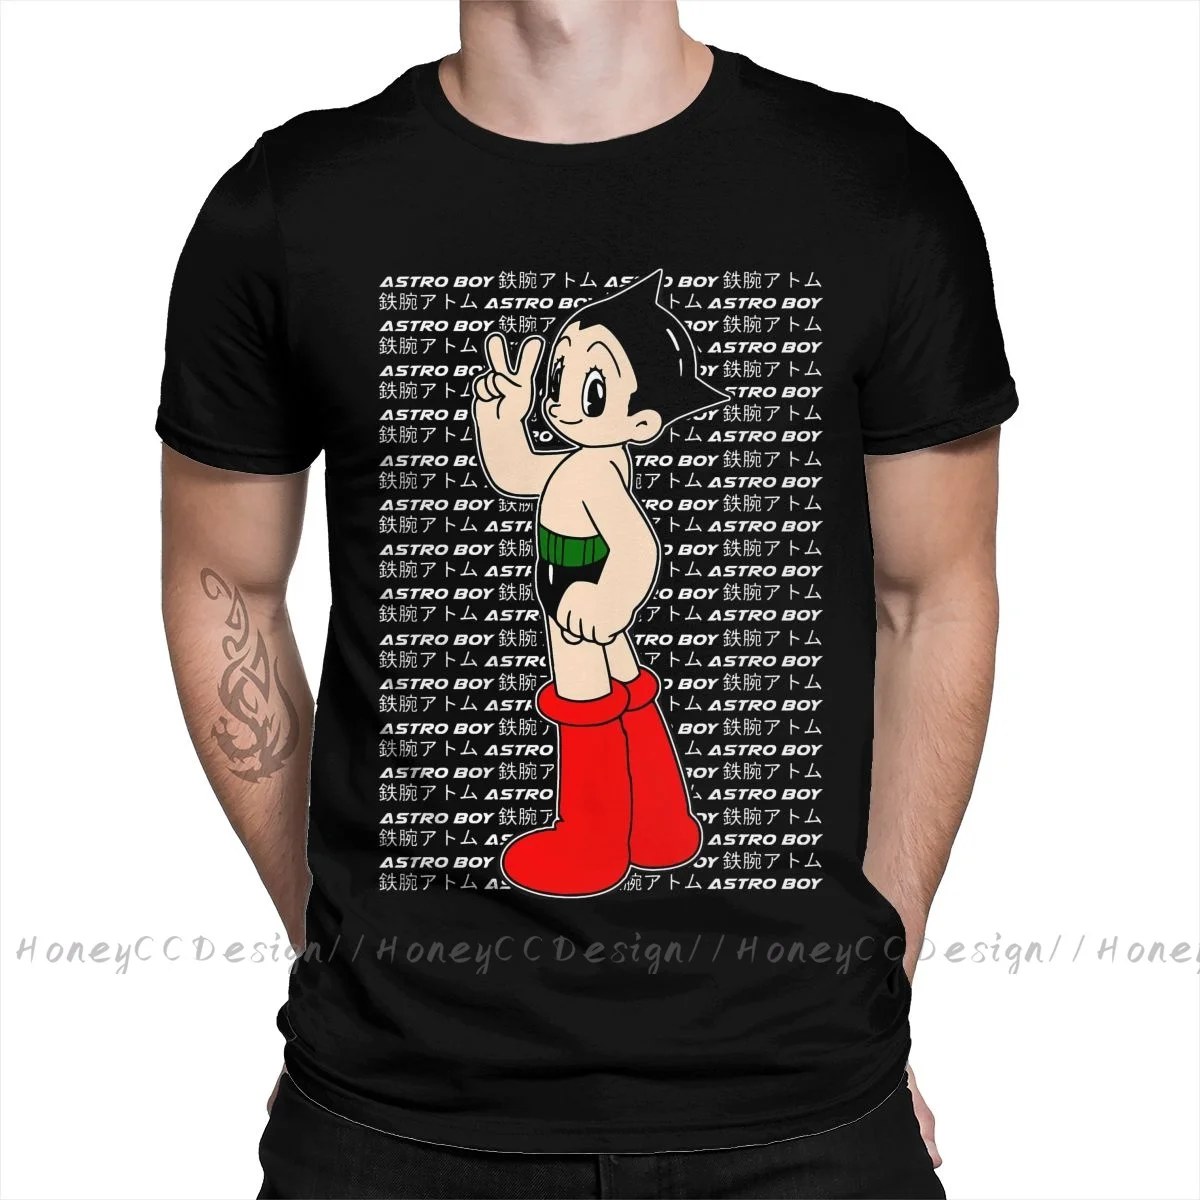 Cuphead New Arrival T-Shirt Astro Boy - Mighty Atom Shirt Crewneck Cotton Men TShirt For Adults Plus Size